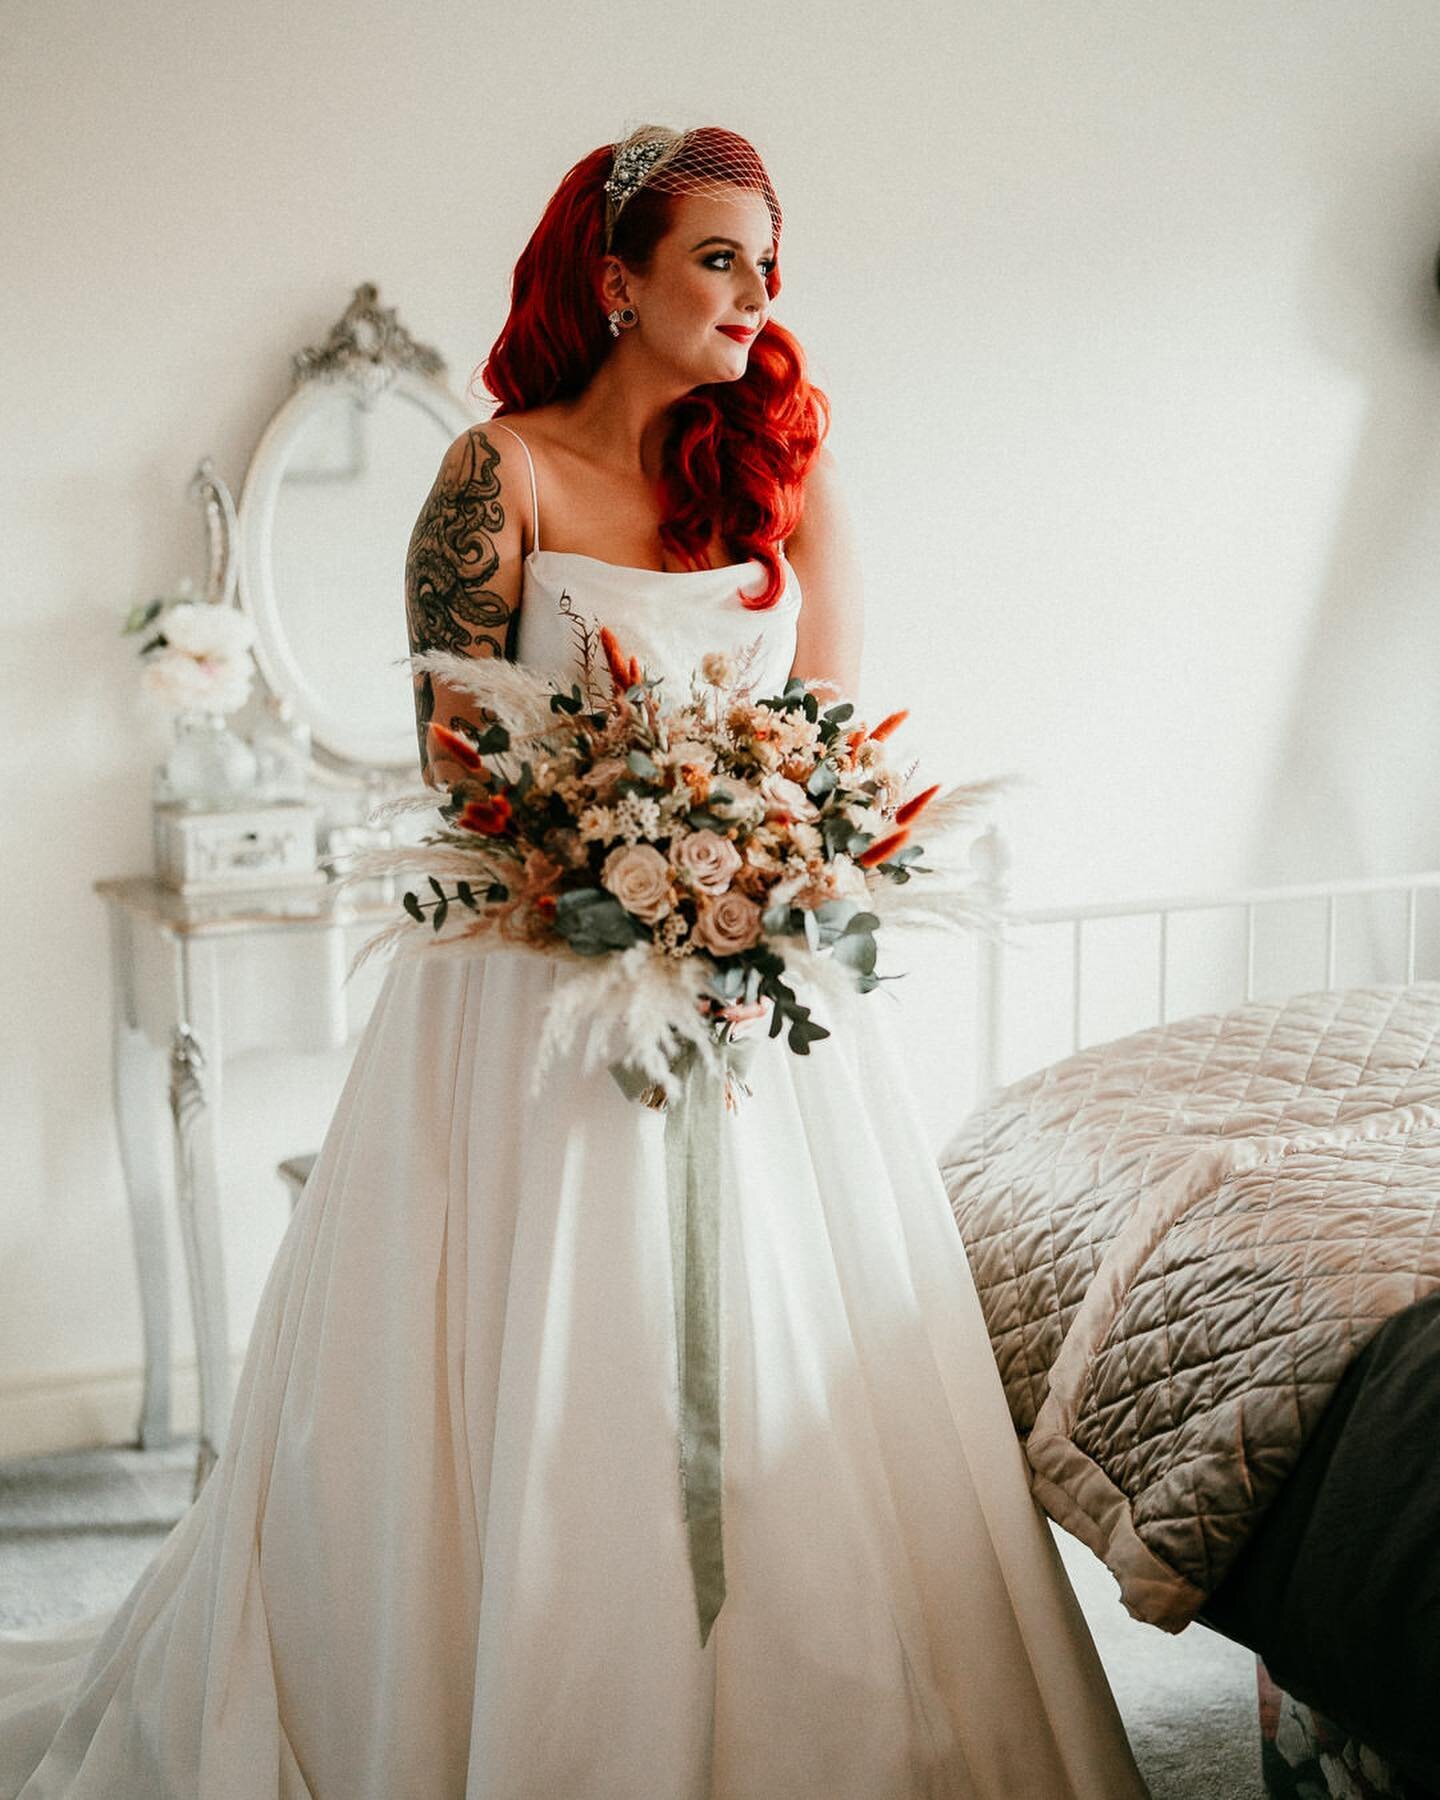 Clare&rsquo;s prep ✨
@taggartclare 

Hair: @brassy2sassyy 
Makeup: @annamcconnellmakeup 
Flowers: @evanityboutique 
Dress: @elizajanehowell @seraphim_bridal